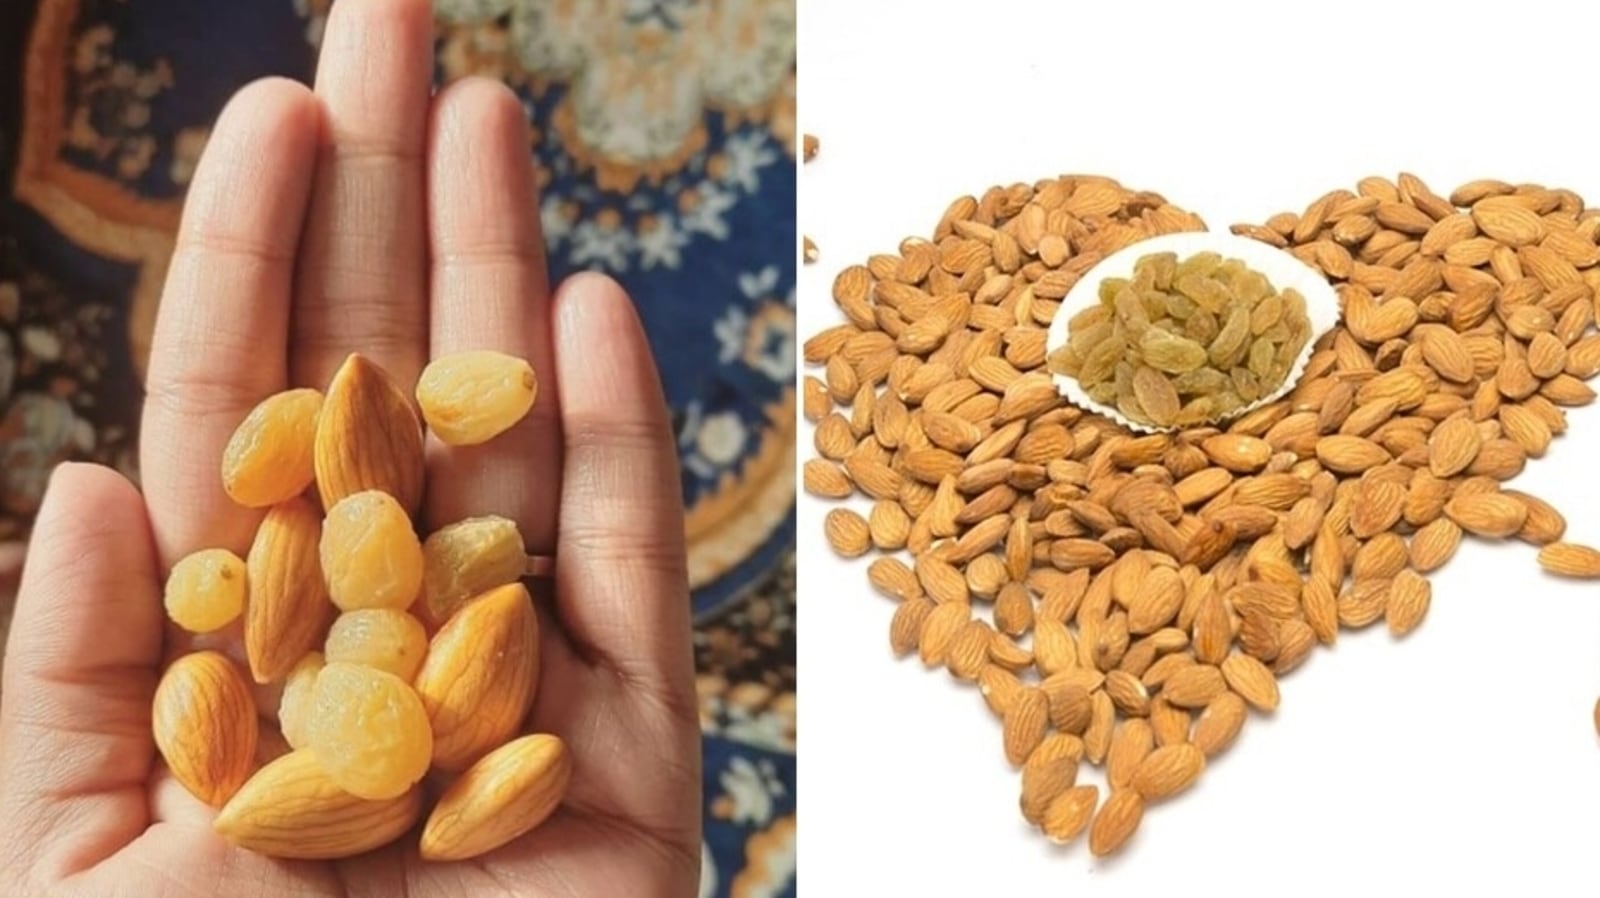 Eating Almond and Raisins together is beneficial for health, know the right time and way to consume them